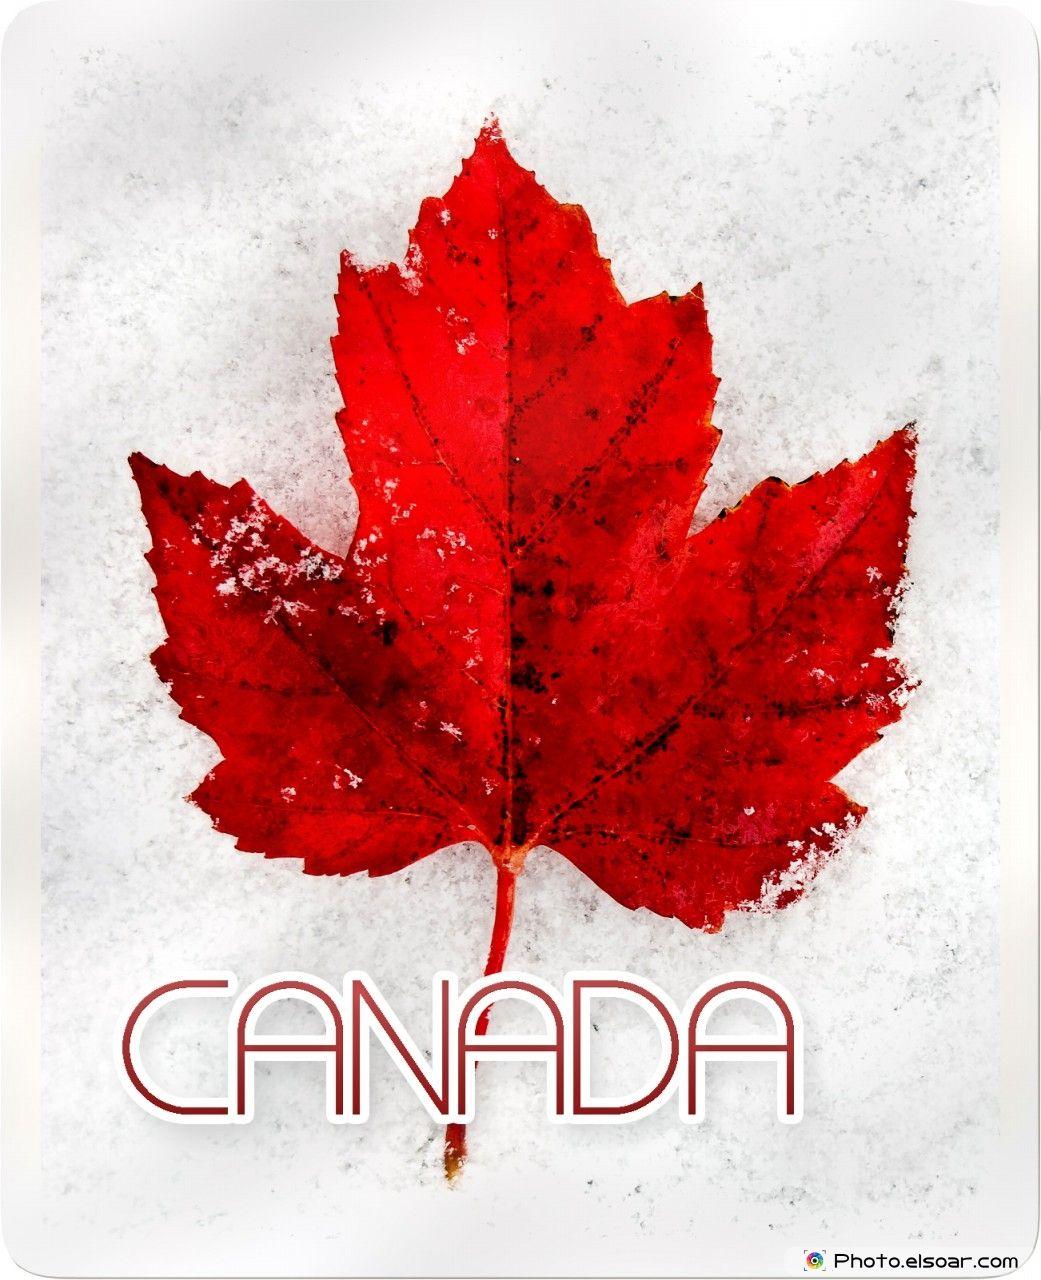 Most Amazing Canada Day Picture And Wallpaper Happy Canada